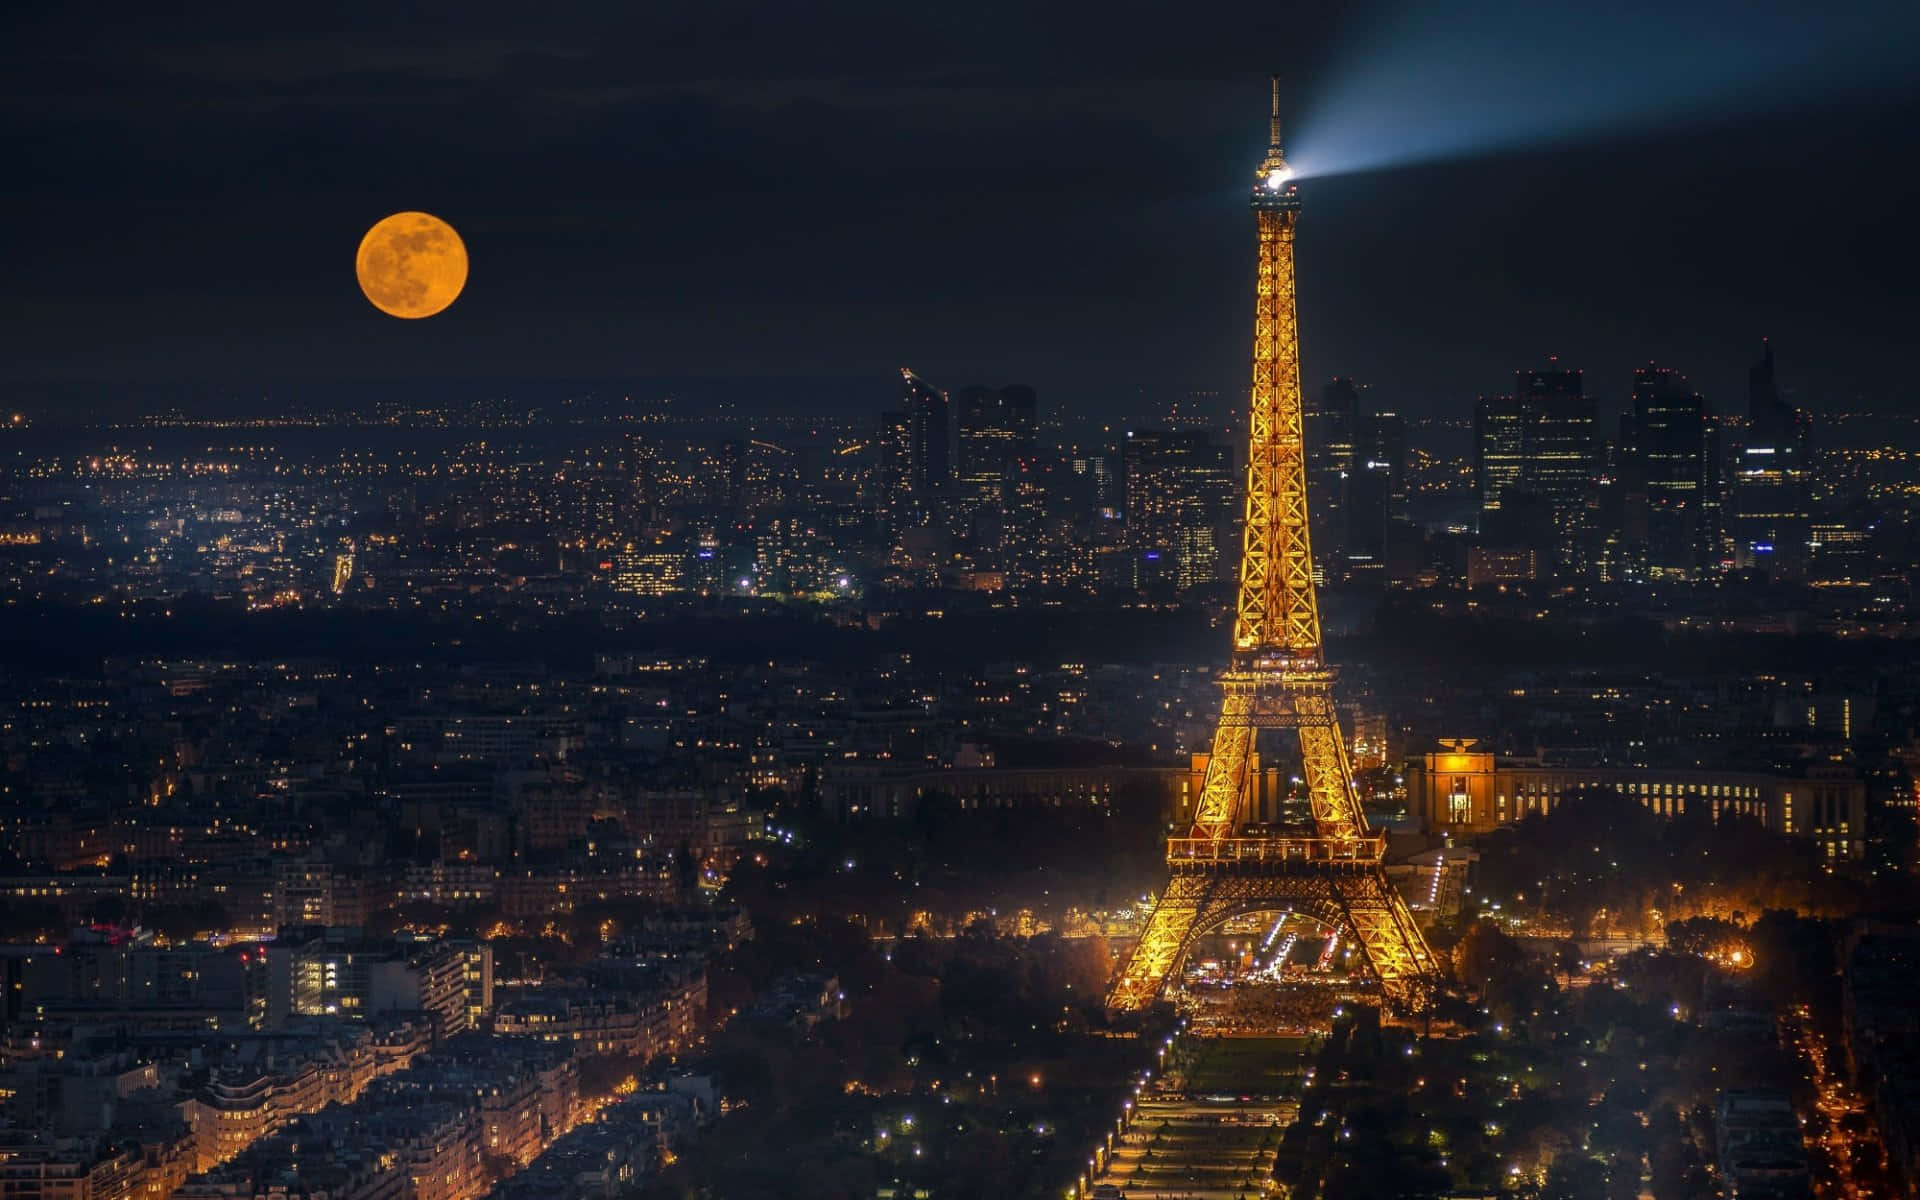 Paris nightlife is best captured at the iconic Eiffel Tower